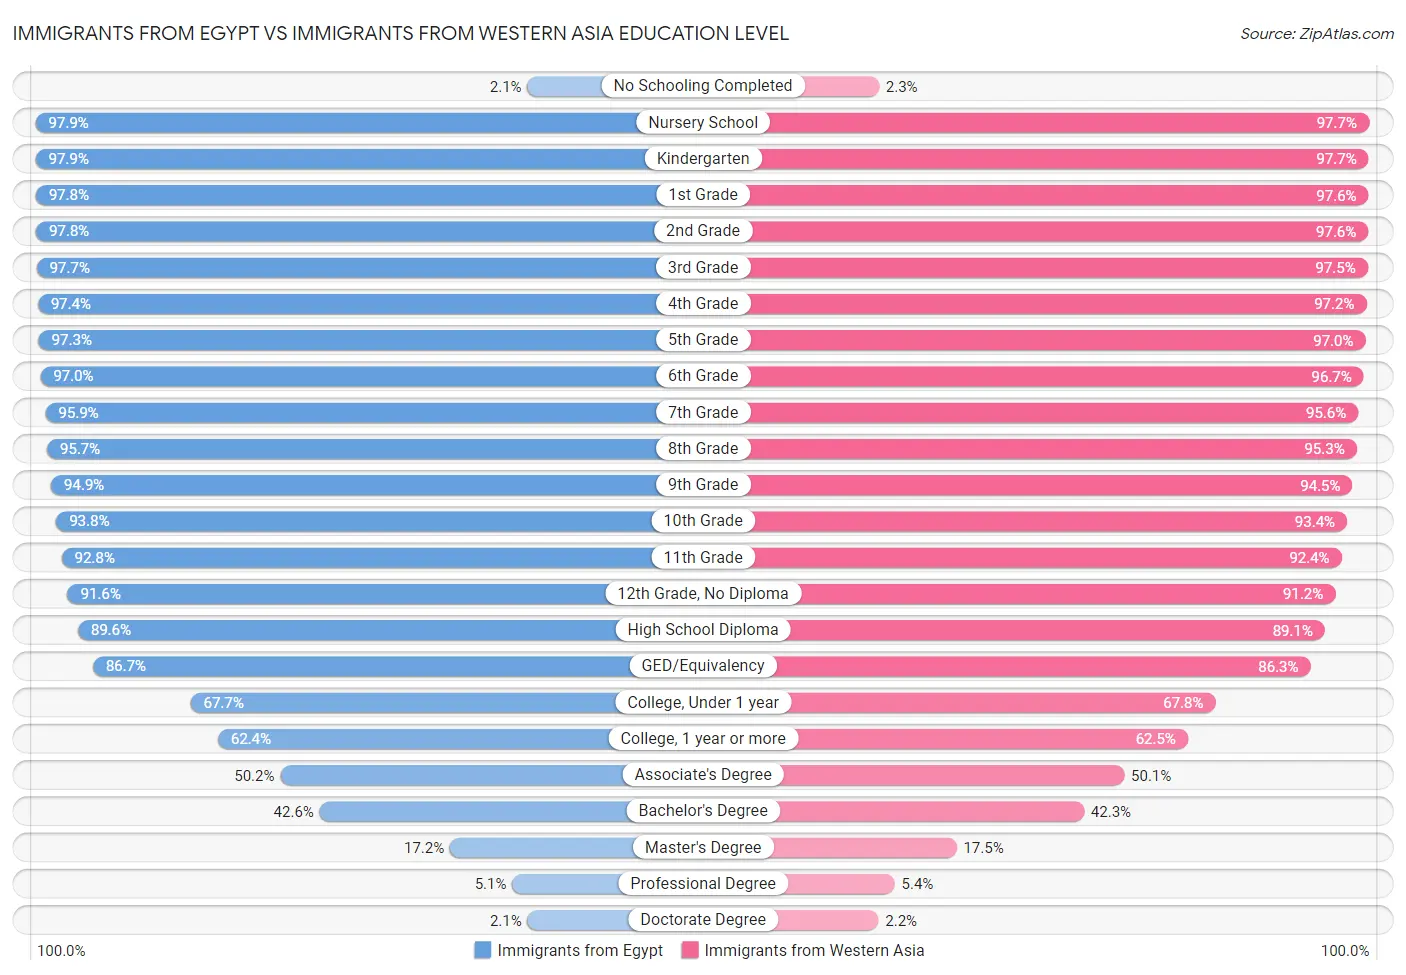 Immigrants from Egypt vs Immigrants from Western Asia Education Level